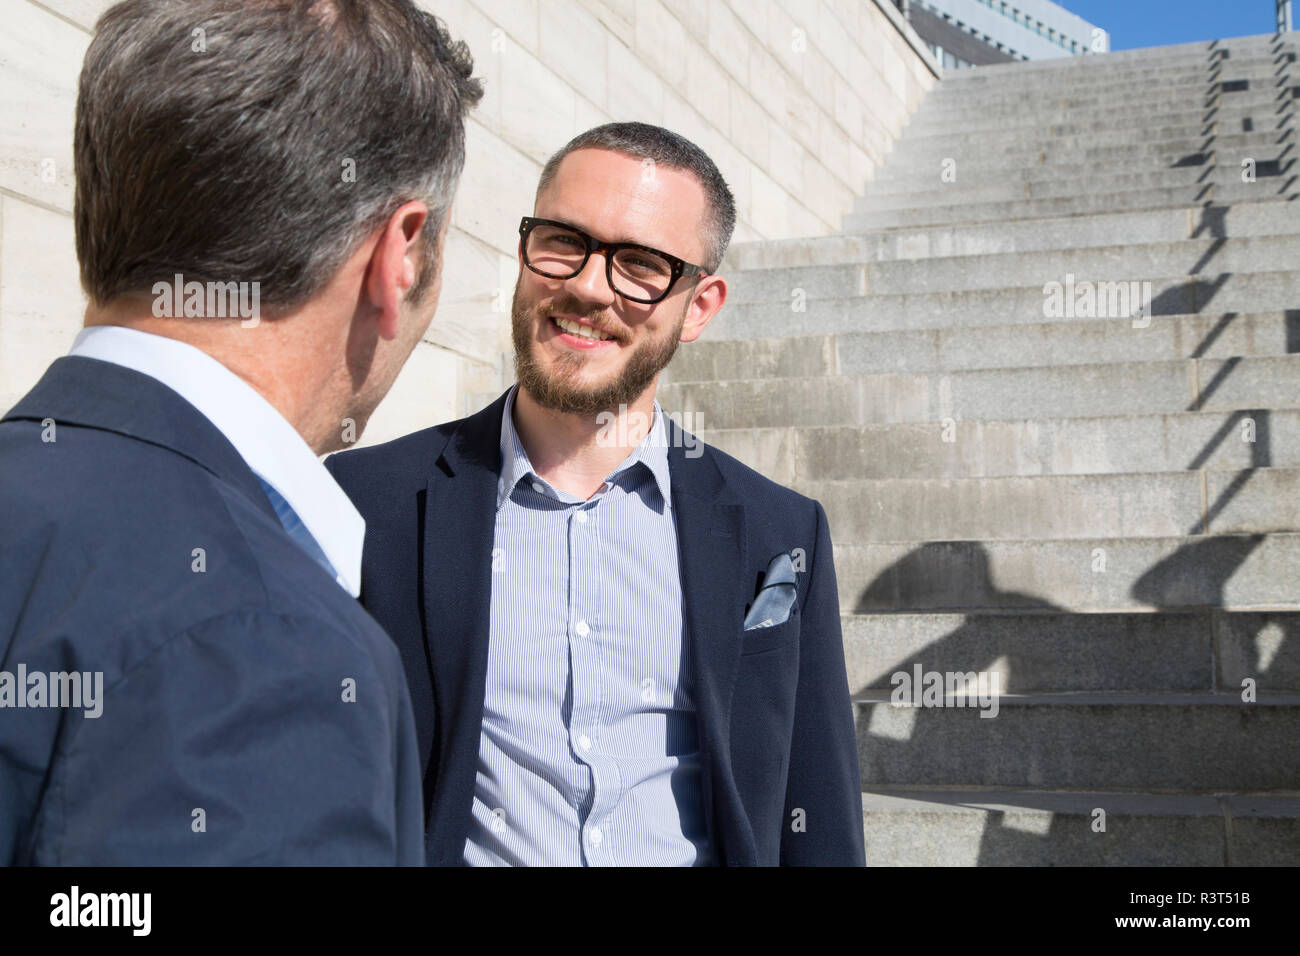 Two businessmen talking at stairs outdoors Stock Photo